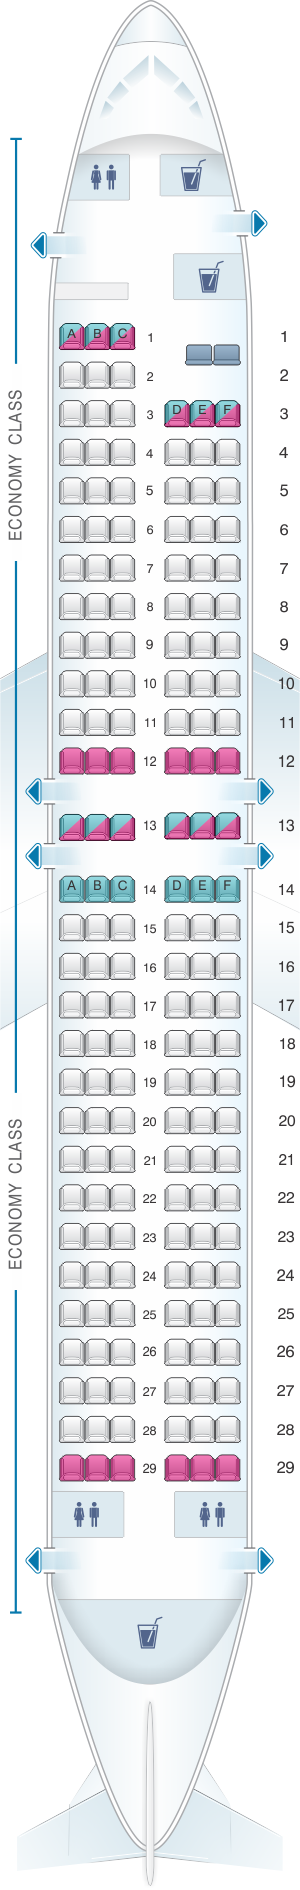 Seat map for Xtra Airways Boeing B737 800